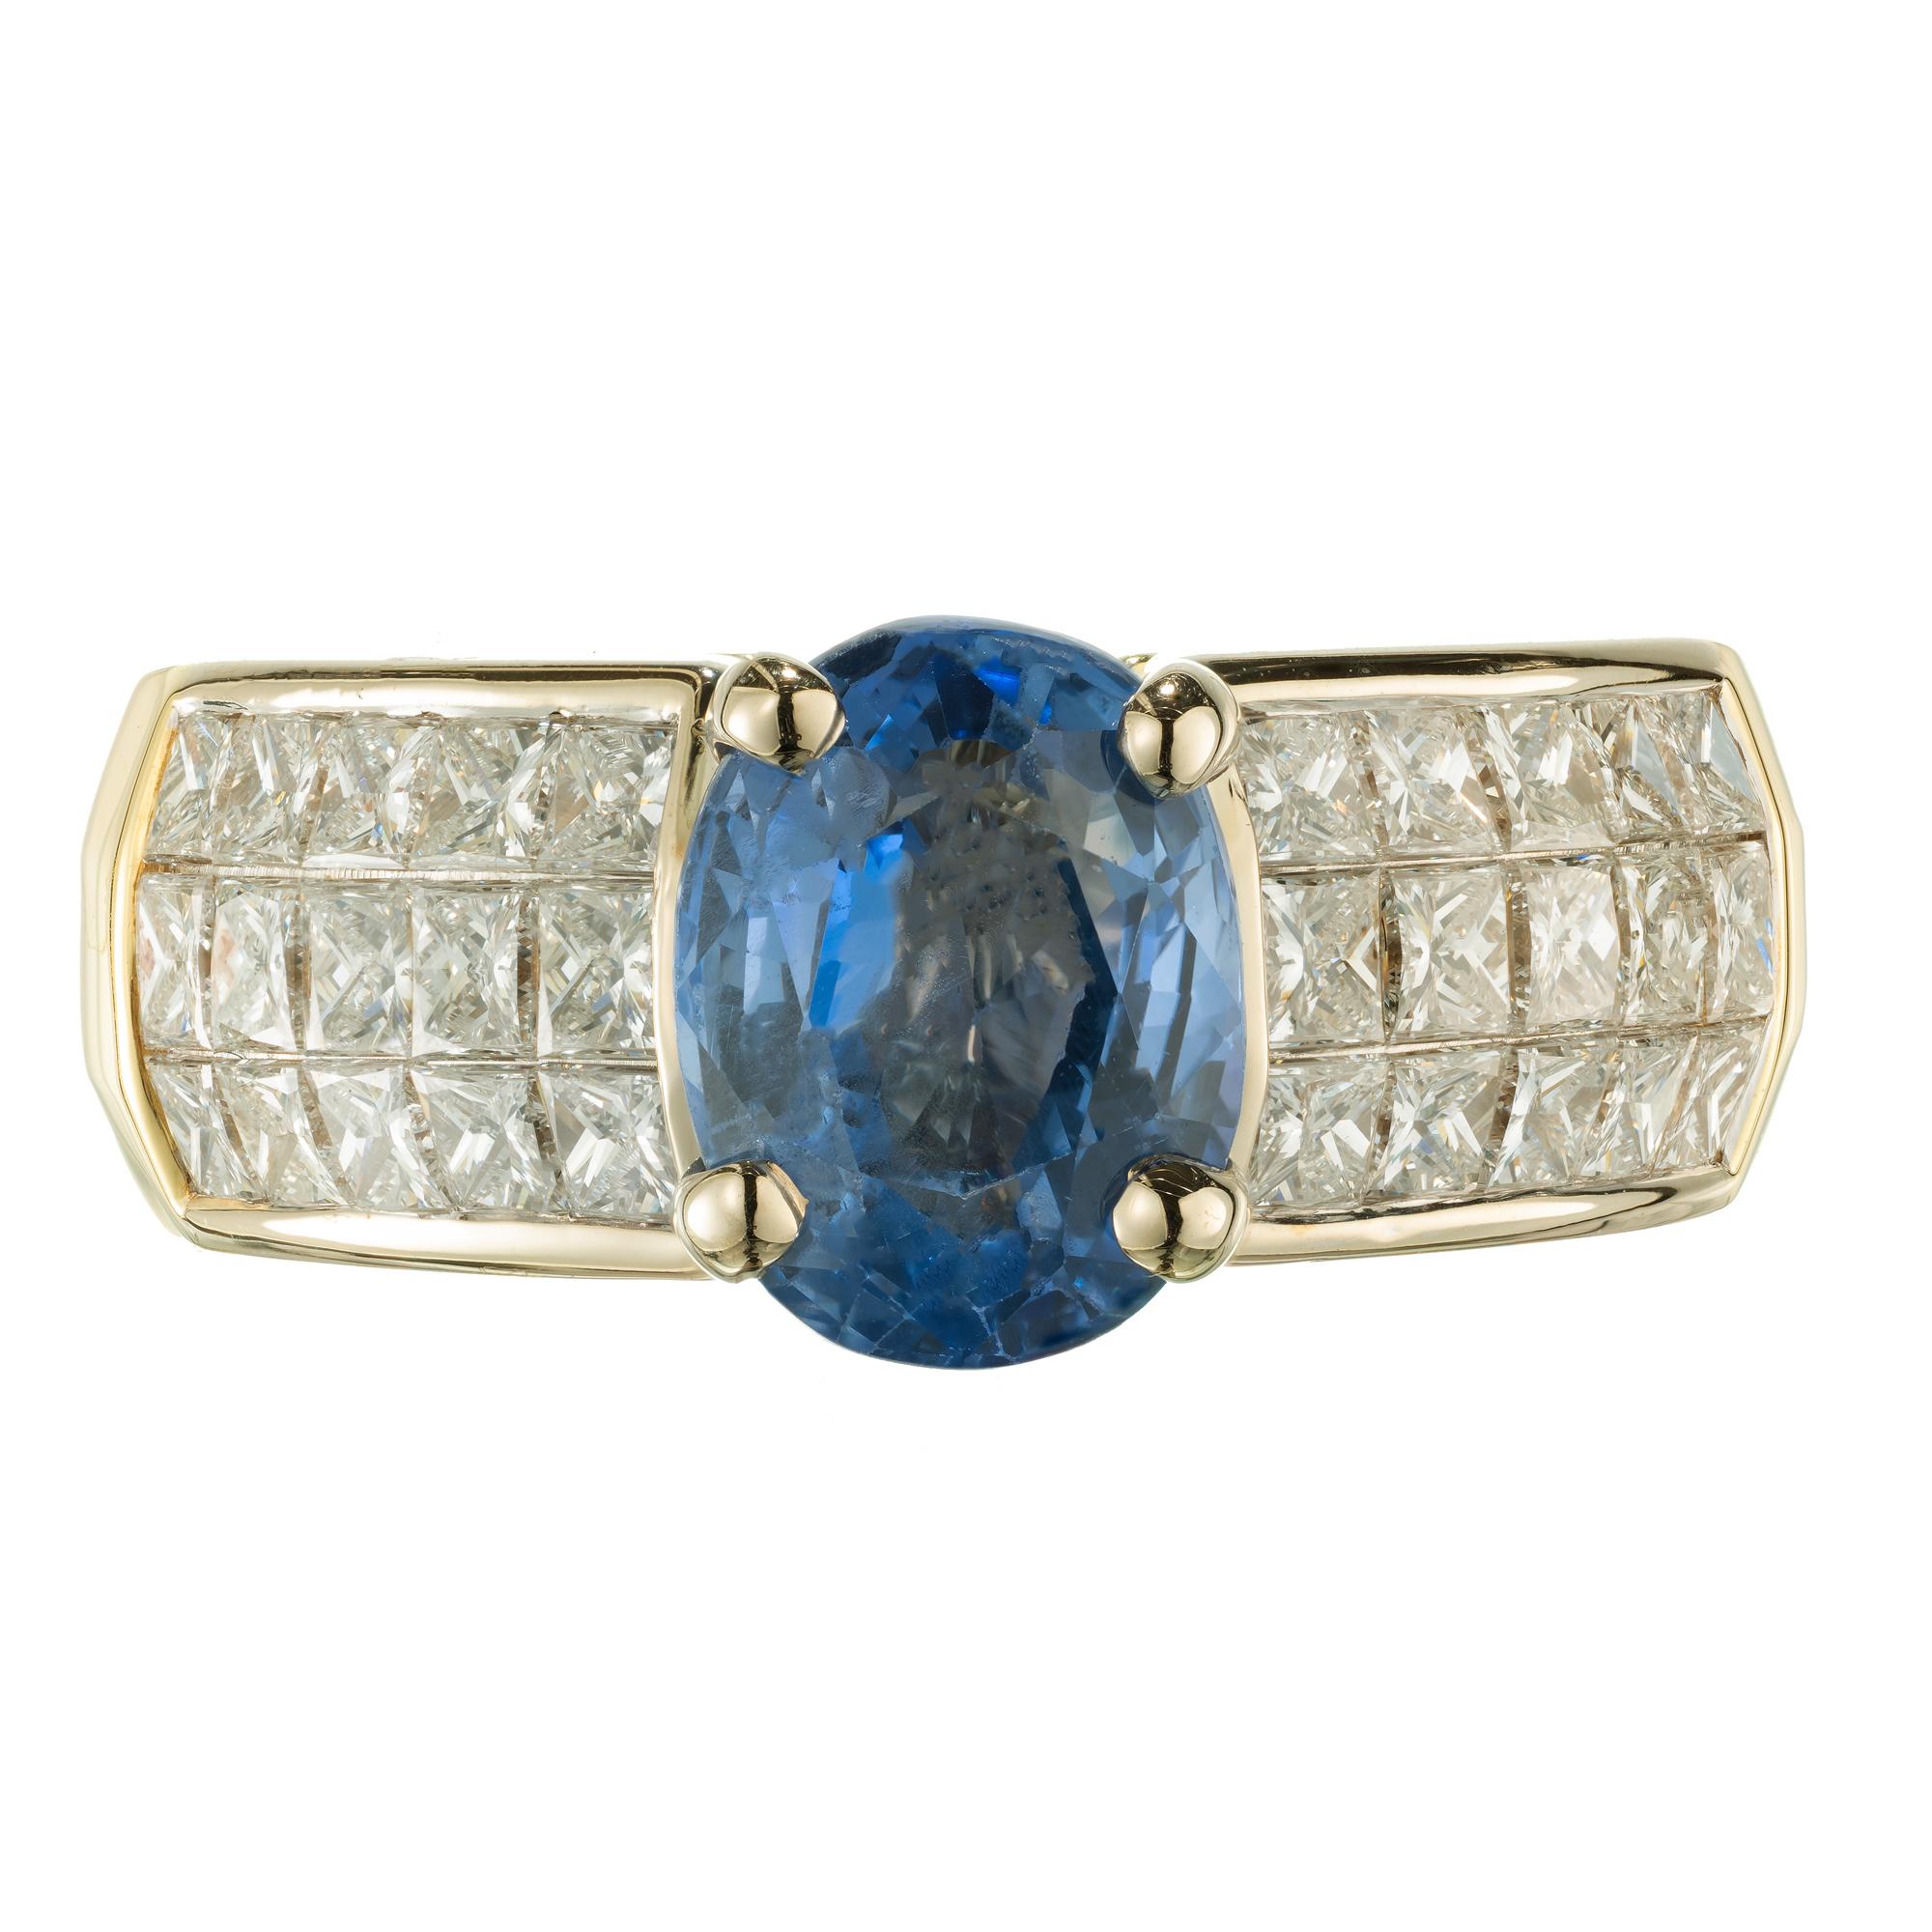 Christopher designs sapphire and diamond ring. Oval sapphire set in 18k yellow gold setting with three rows of 1.50 carats of bright princess cut diamonds. GIA certified as natural no heat

1 oval blue sapphire, approx. 2.37cts SI GIA Certificate